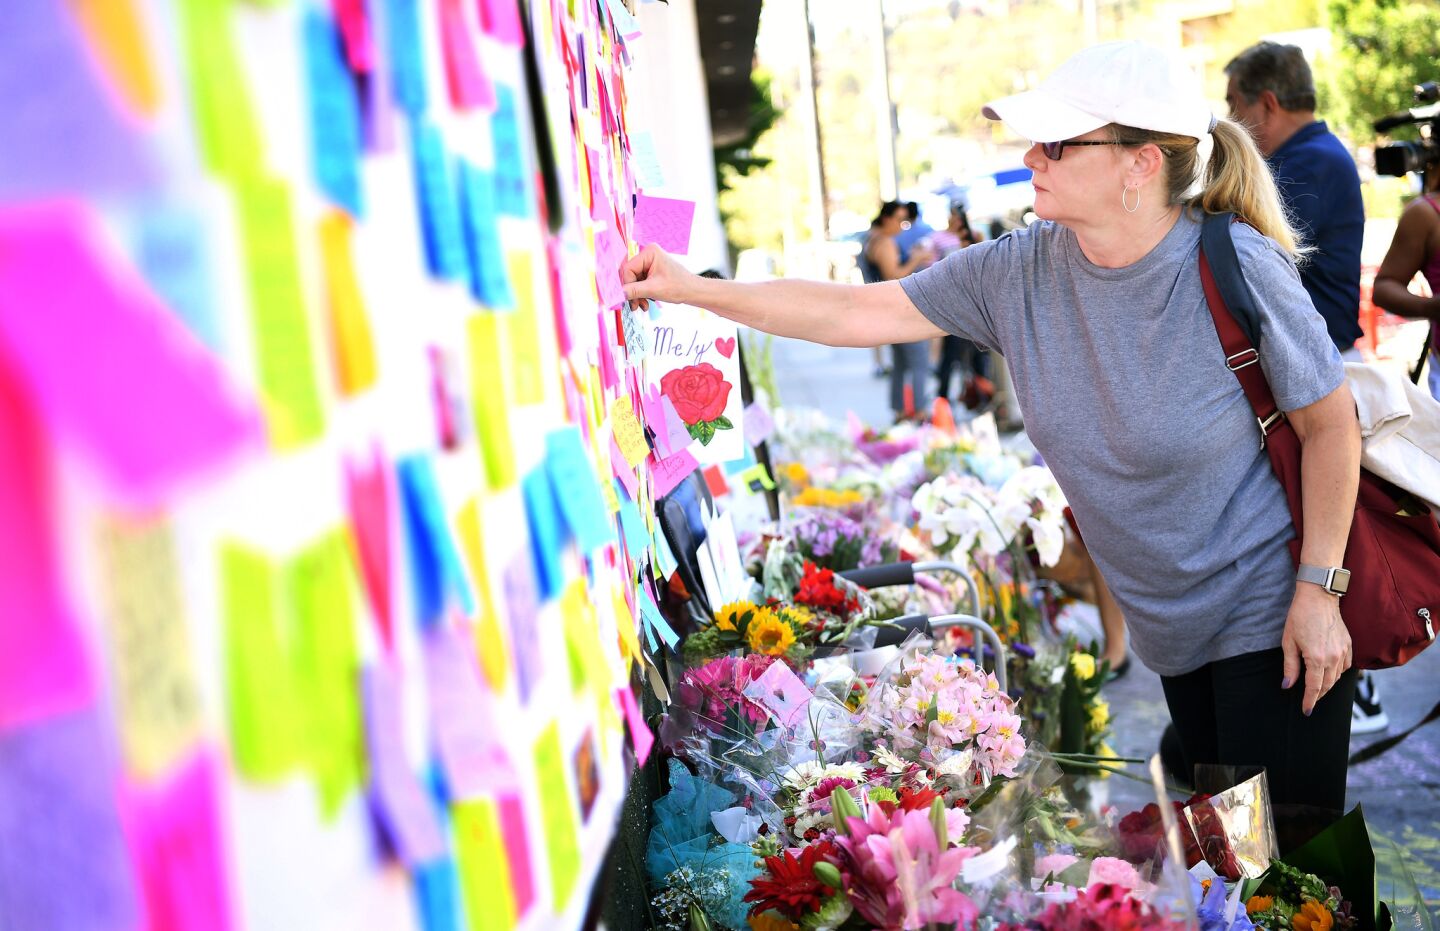 Fiona Shields, of Los Feliz, leaves a note at a memorial outside of Trader Joe's in Silver Lake on Monday.